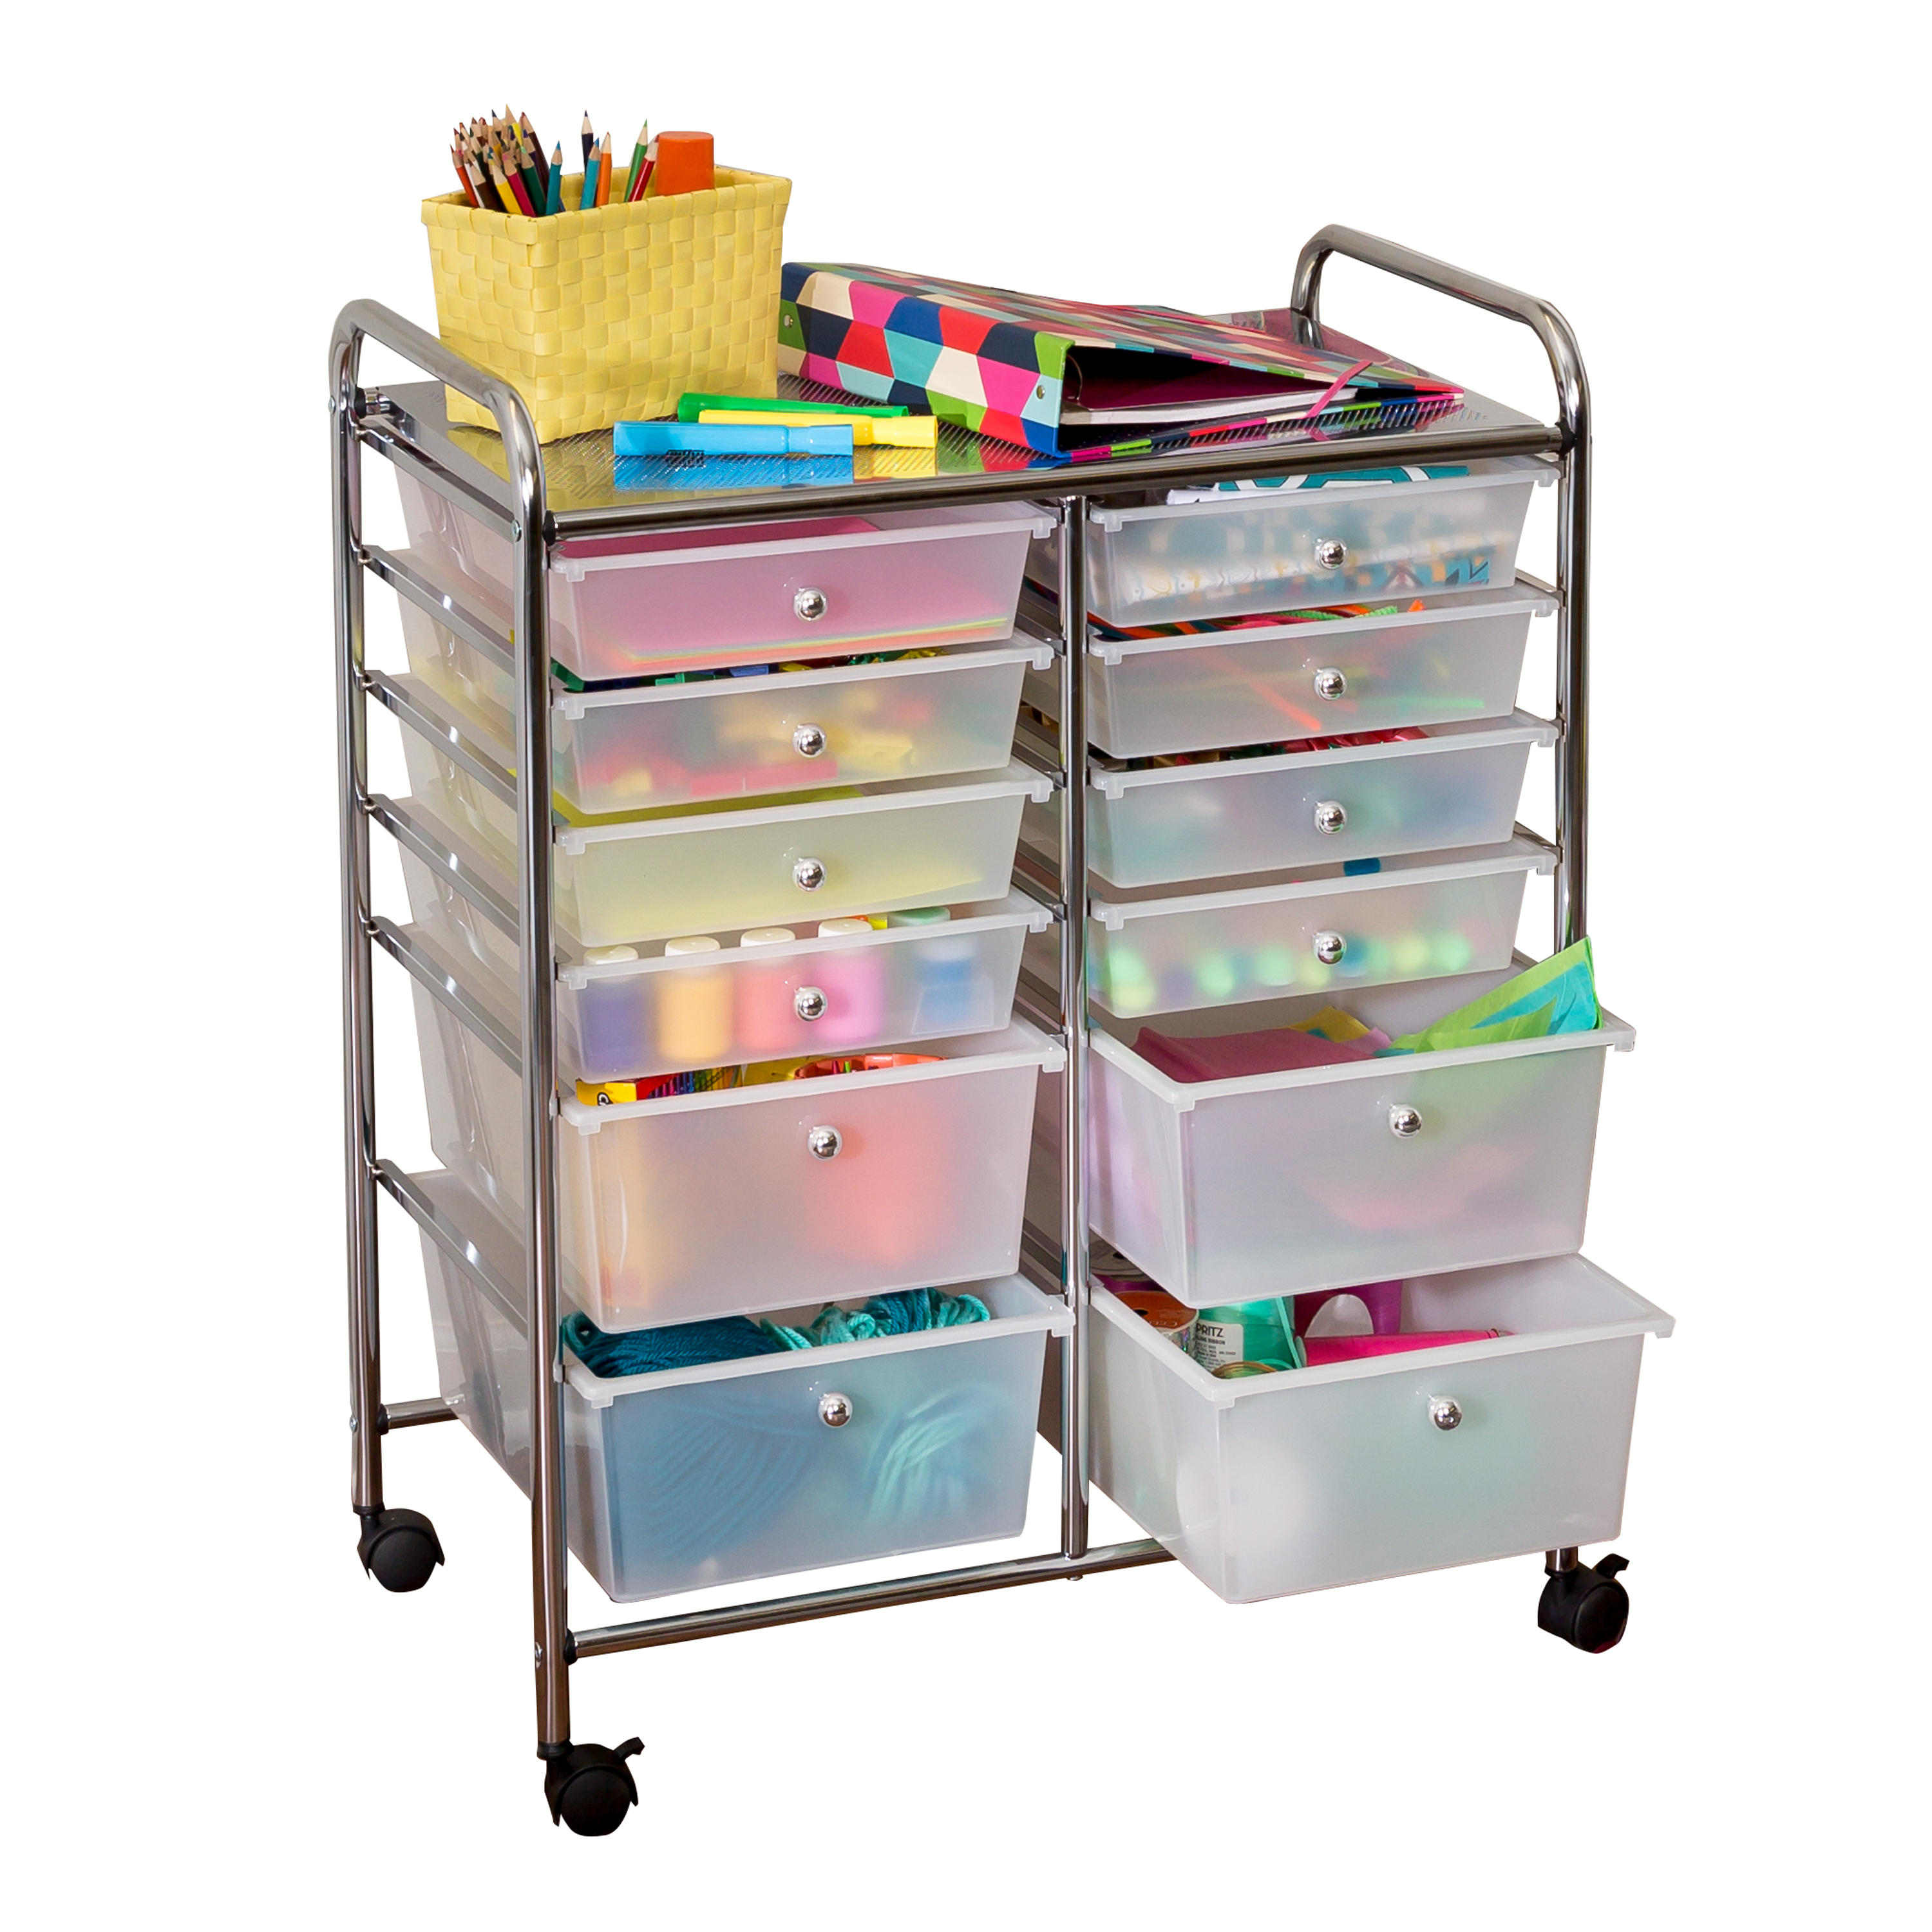 Honey-Can-Do Plastic 12-Drawer Rolling Craft Craft or Office Cart, Clear/Chrome - image 2 of 10